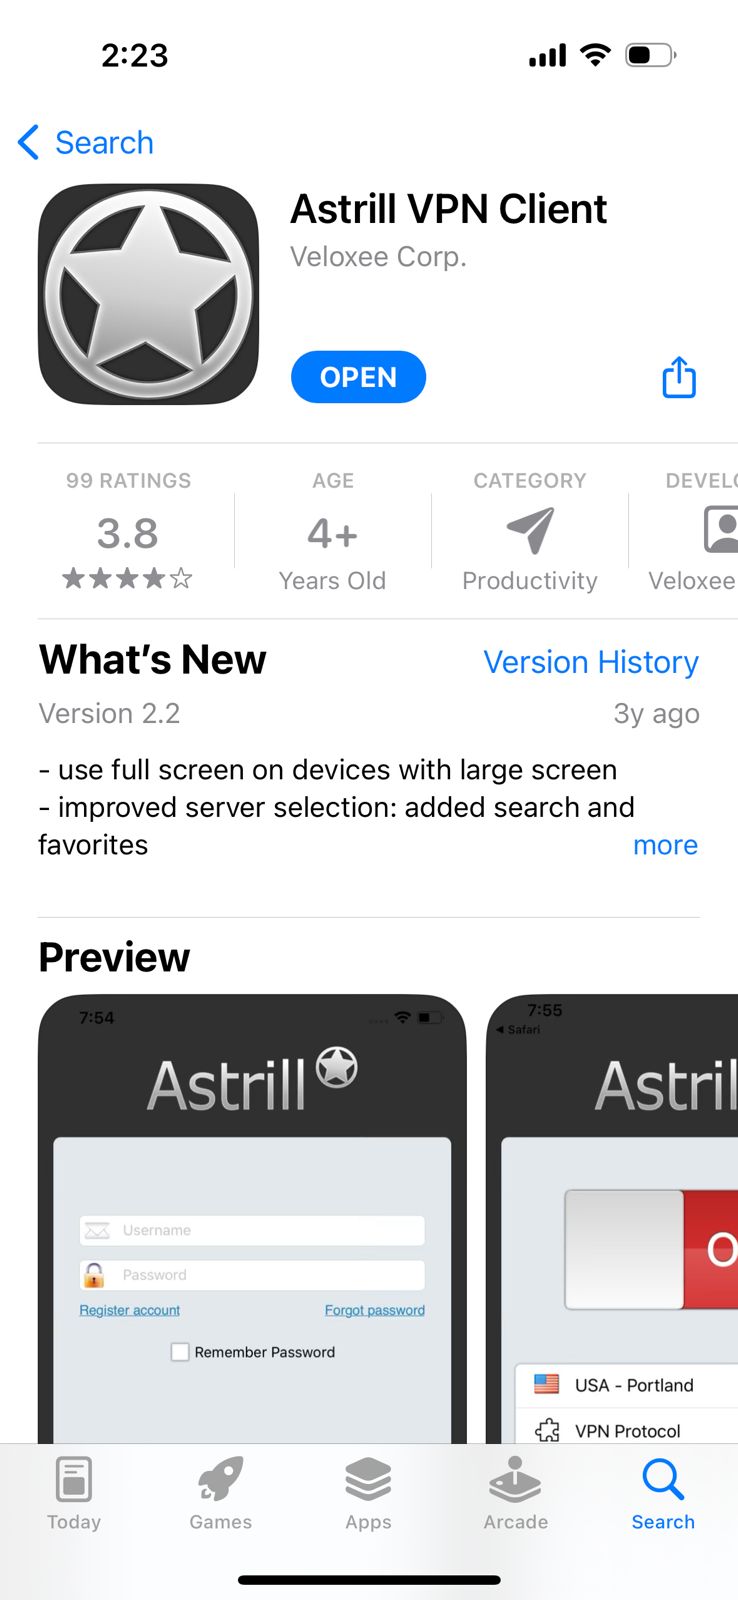 App Storе and installing the AstrillVPN app